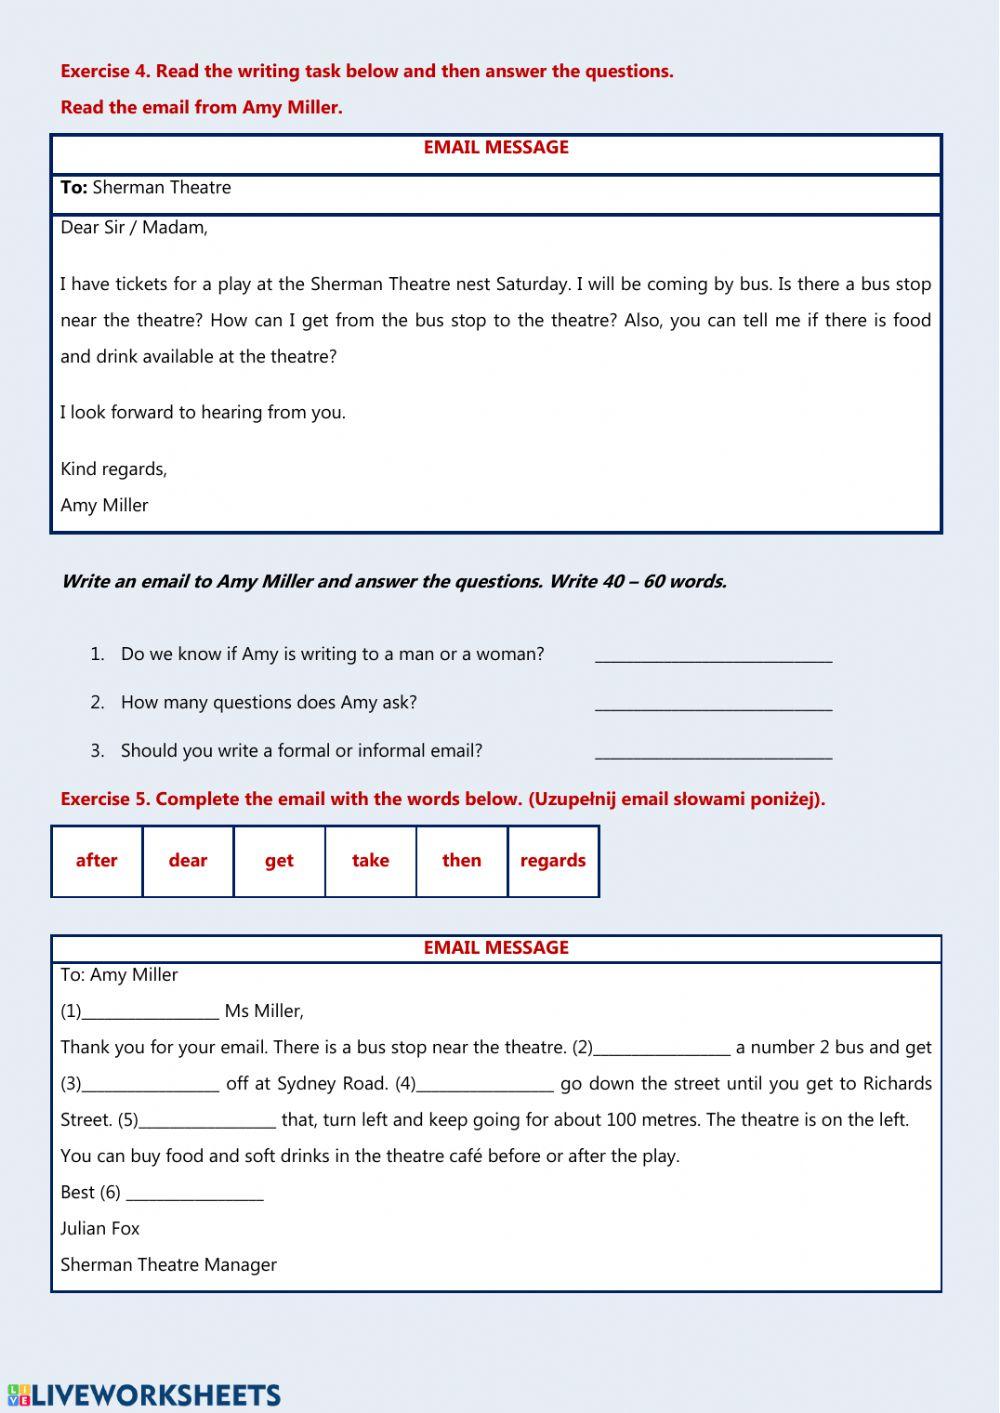 Teen Explorer 7 A formal email - writing 2